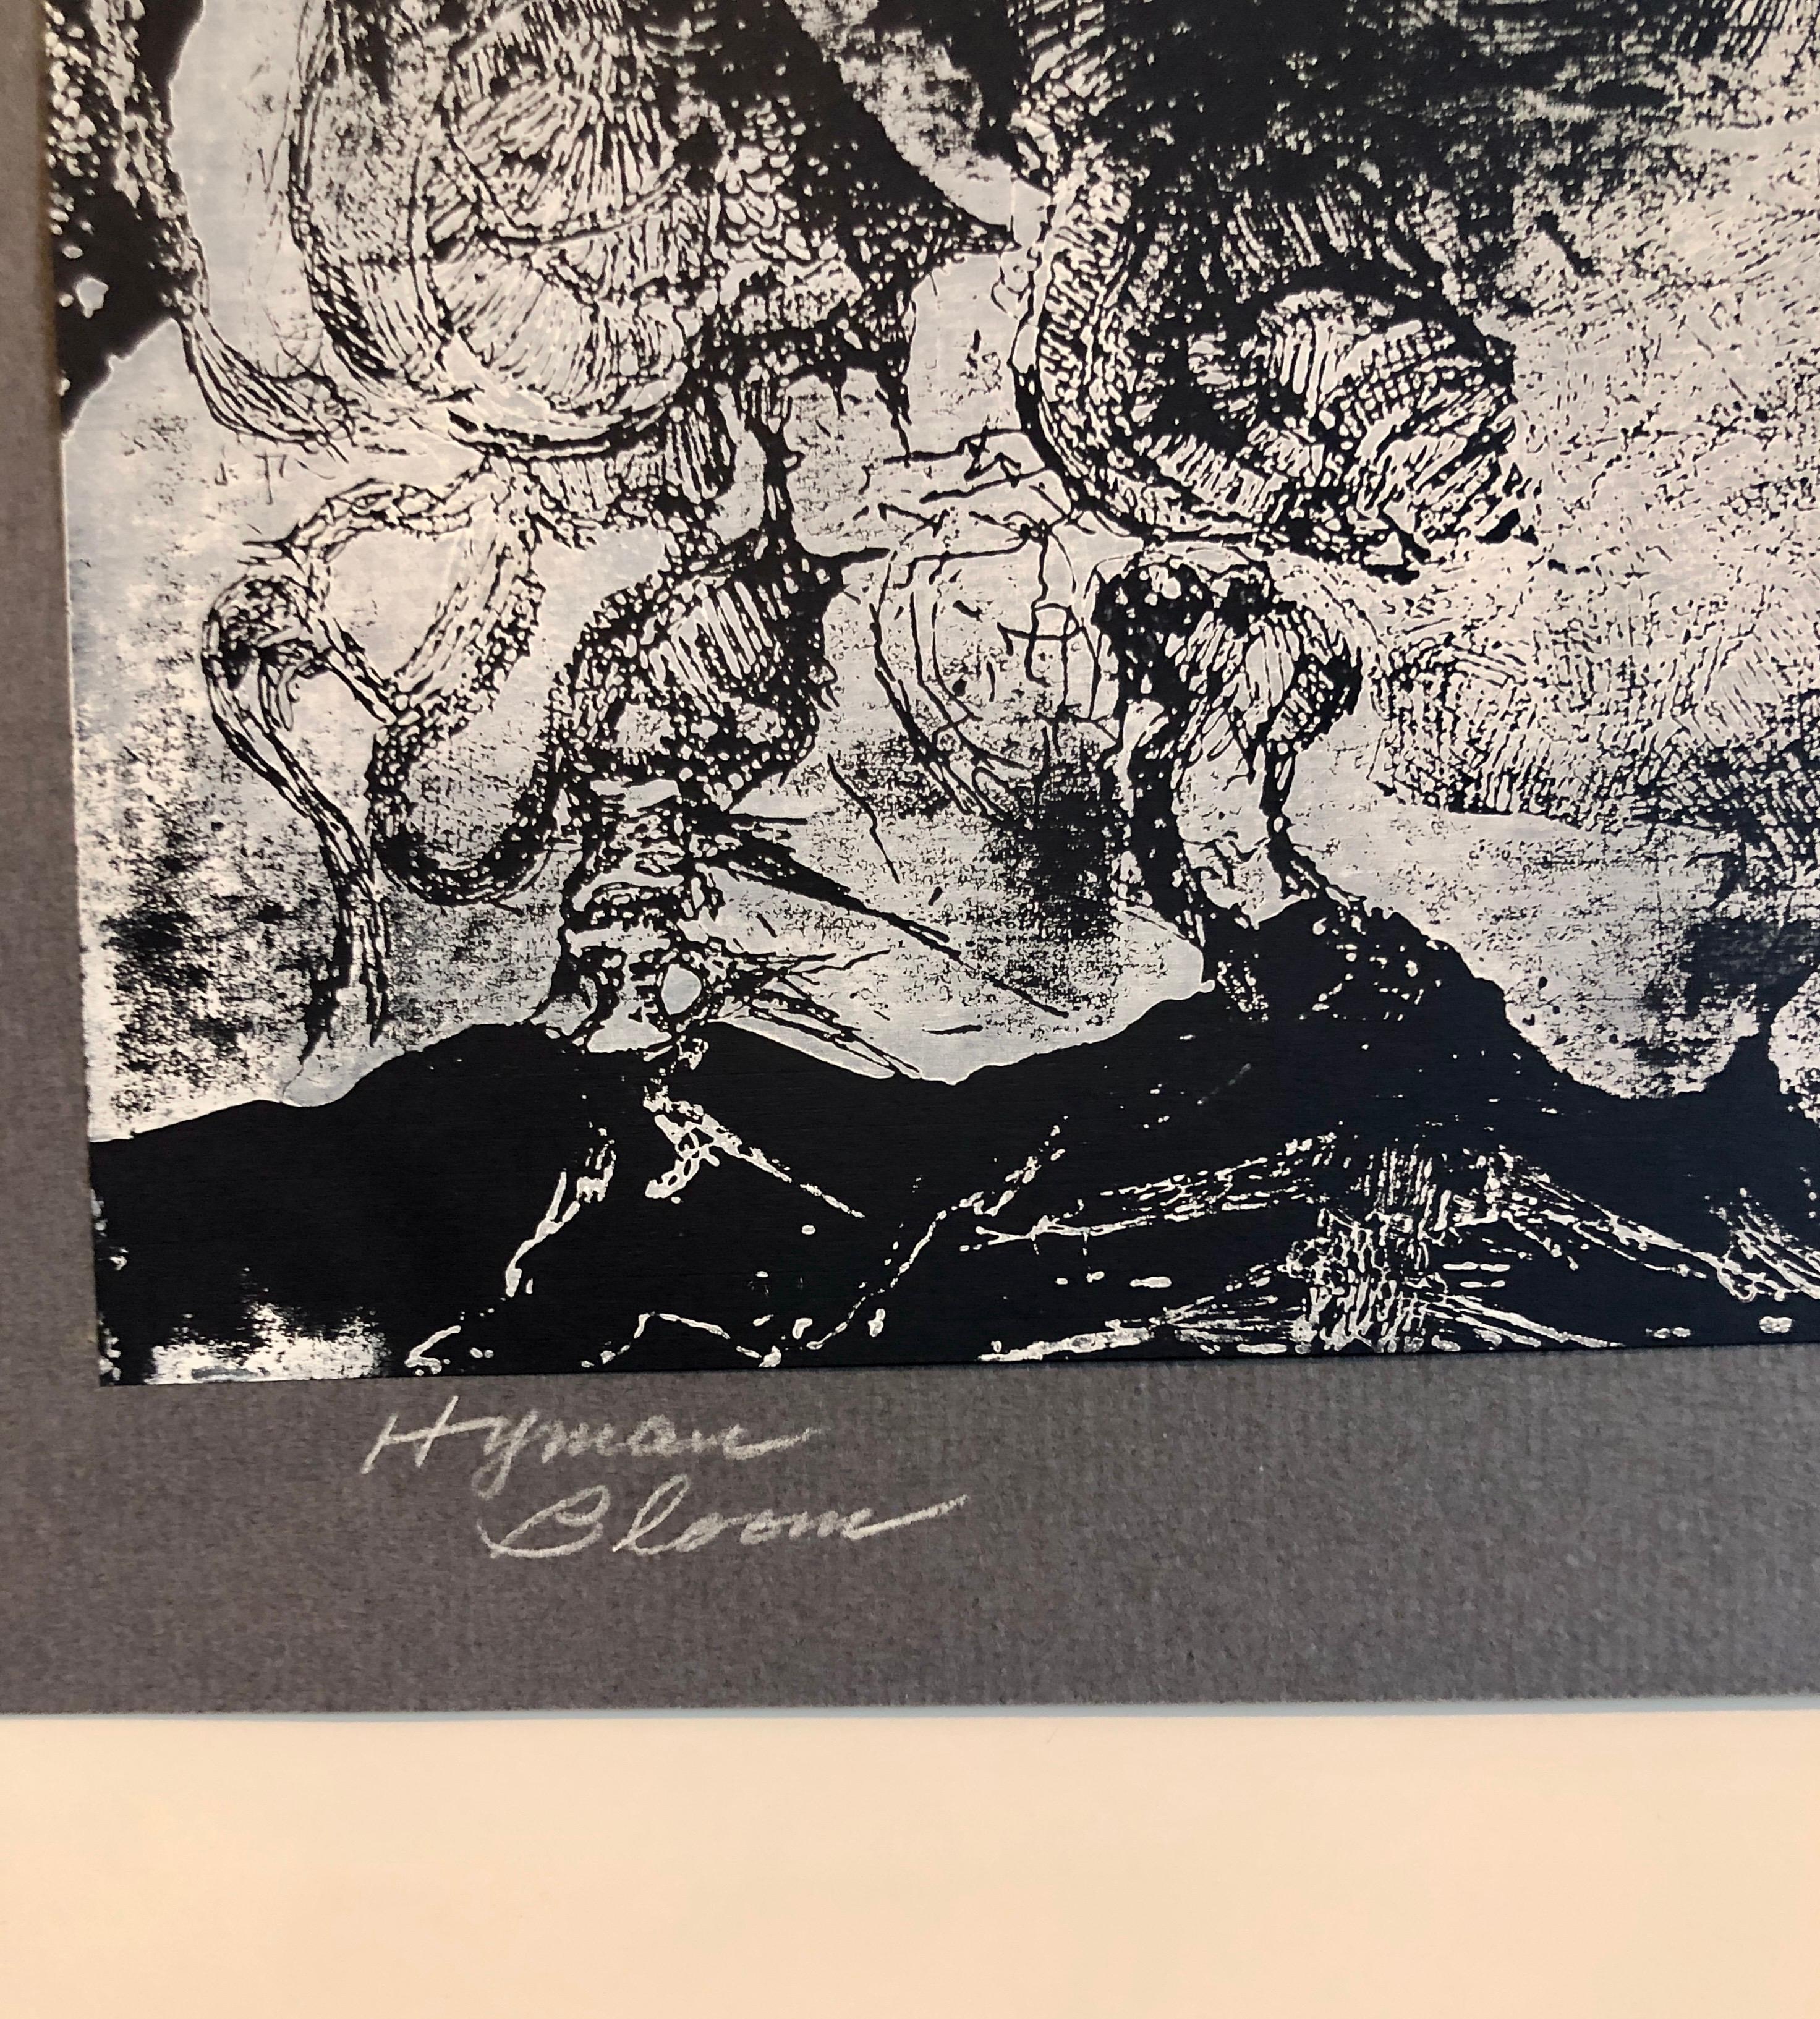 Boston Abstract Expressionist Hyman Bloom Monoprint Monotype Print Martin Sumers 2